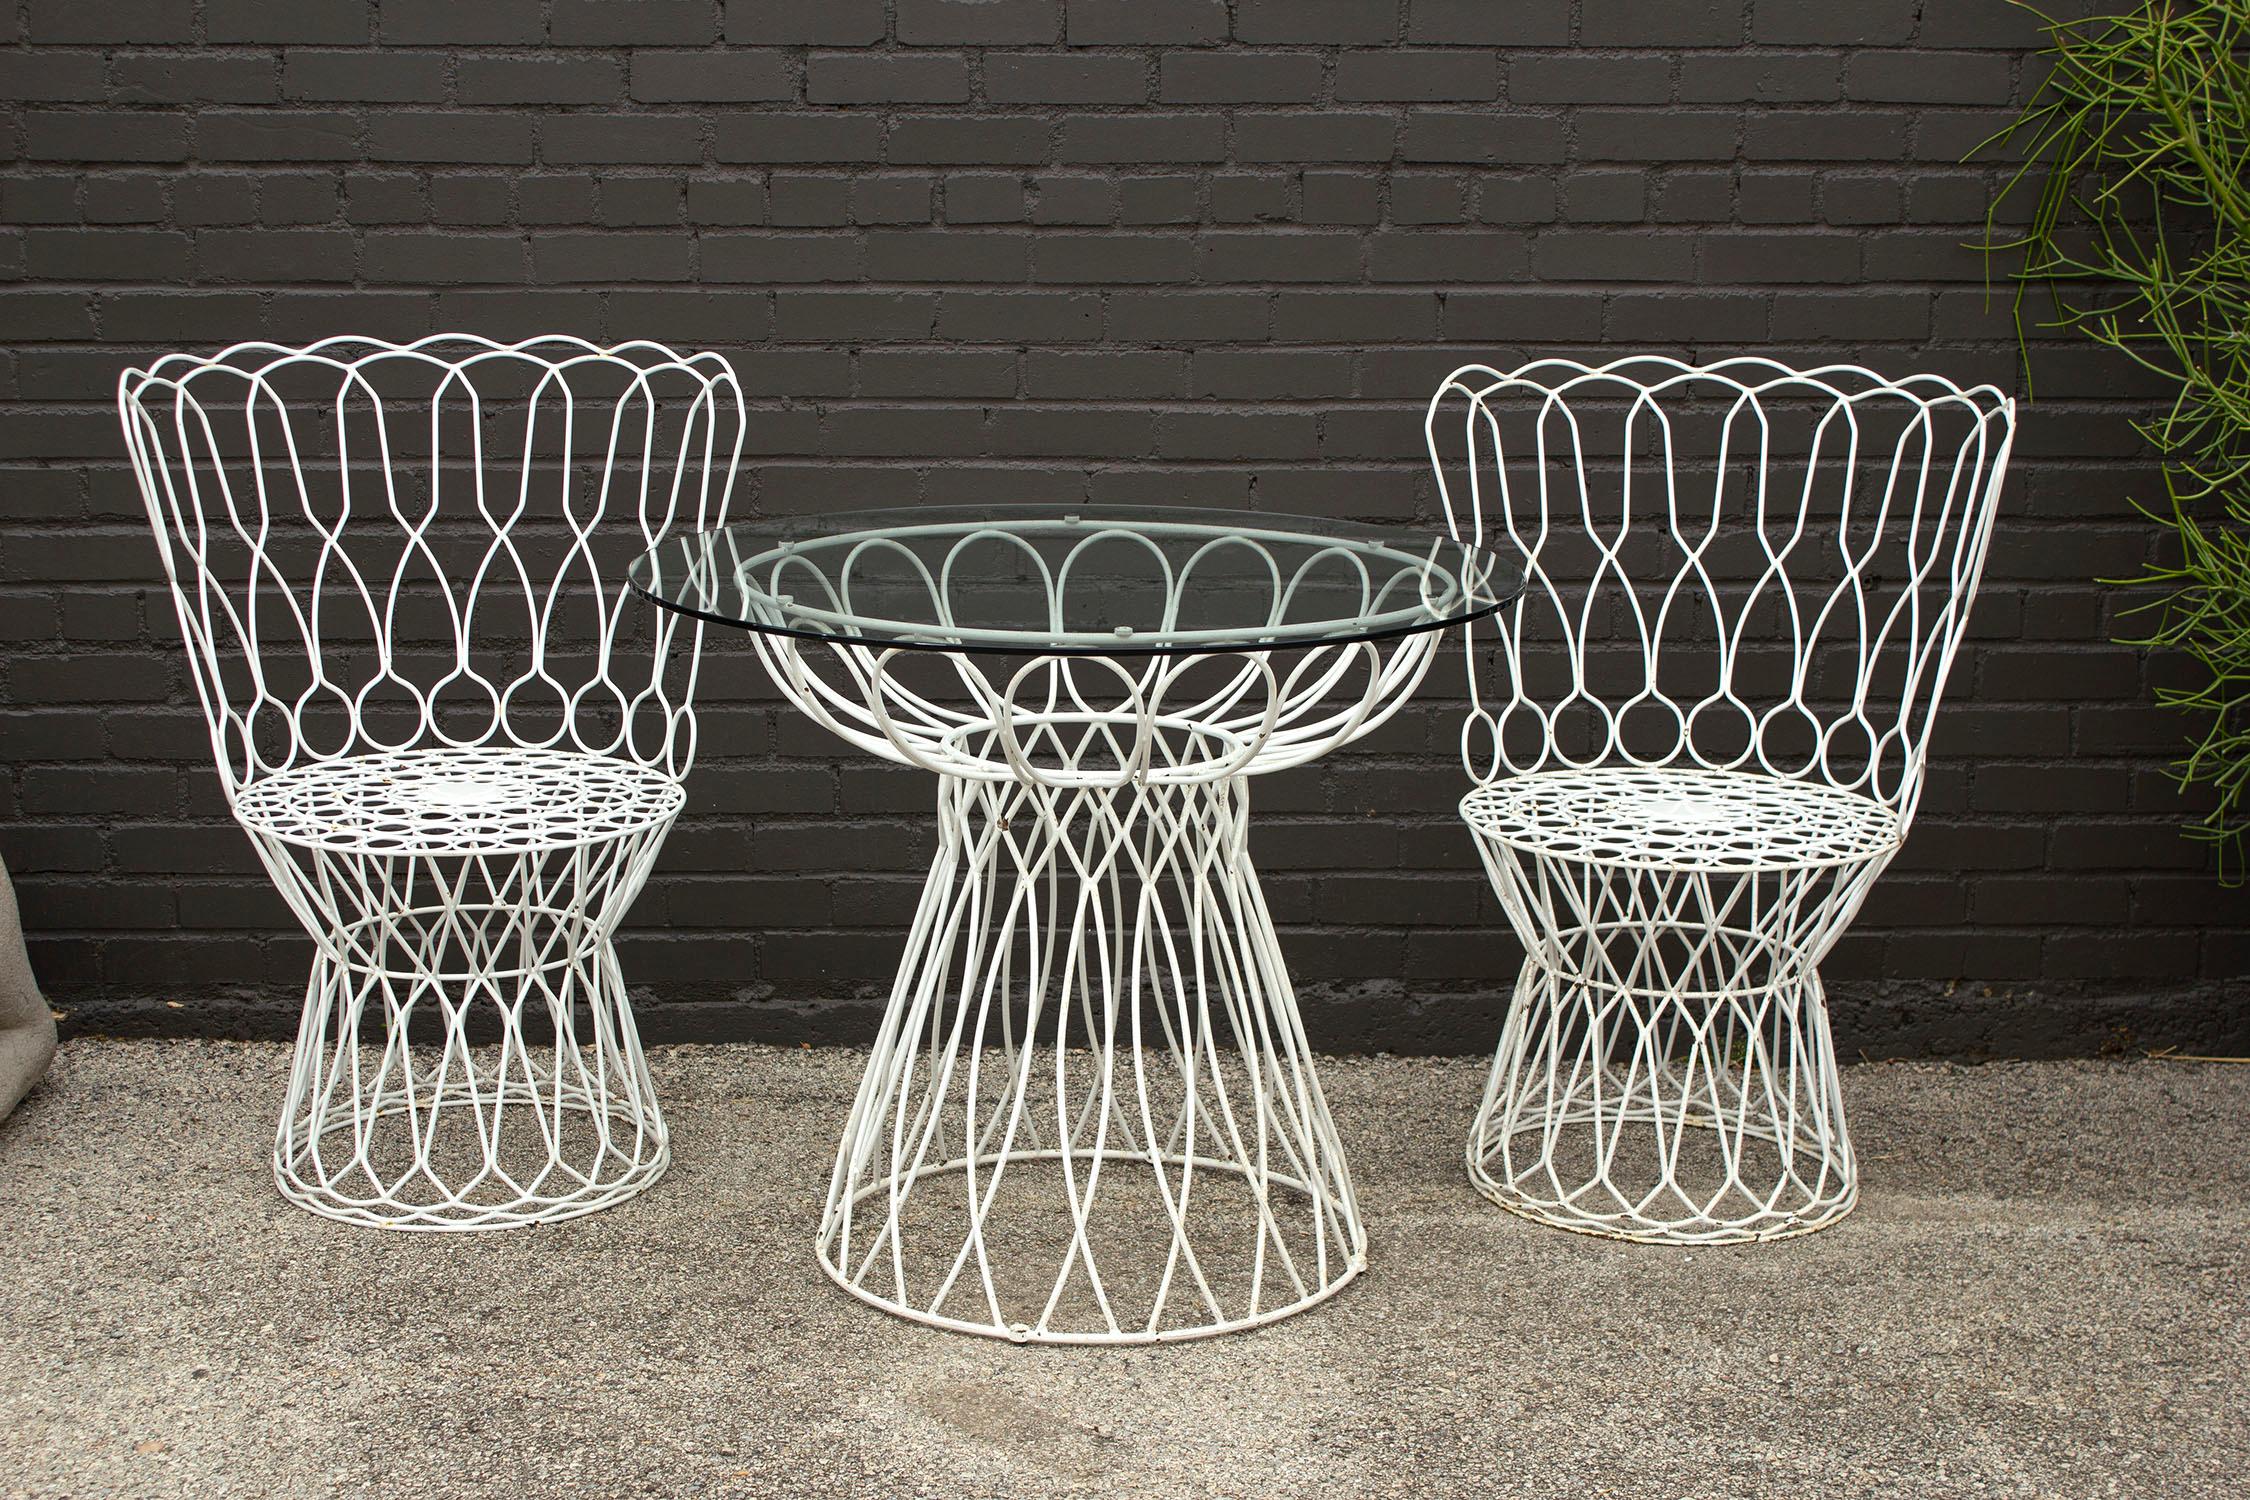 Patricia Urquiola Re-Trouve wire patio table and chairs set for EMU, Italy. Can be powder-coated to the color of your choice prior to shipping. Includes 2 seat cushions.

Chairs measure 35